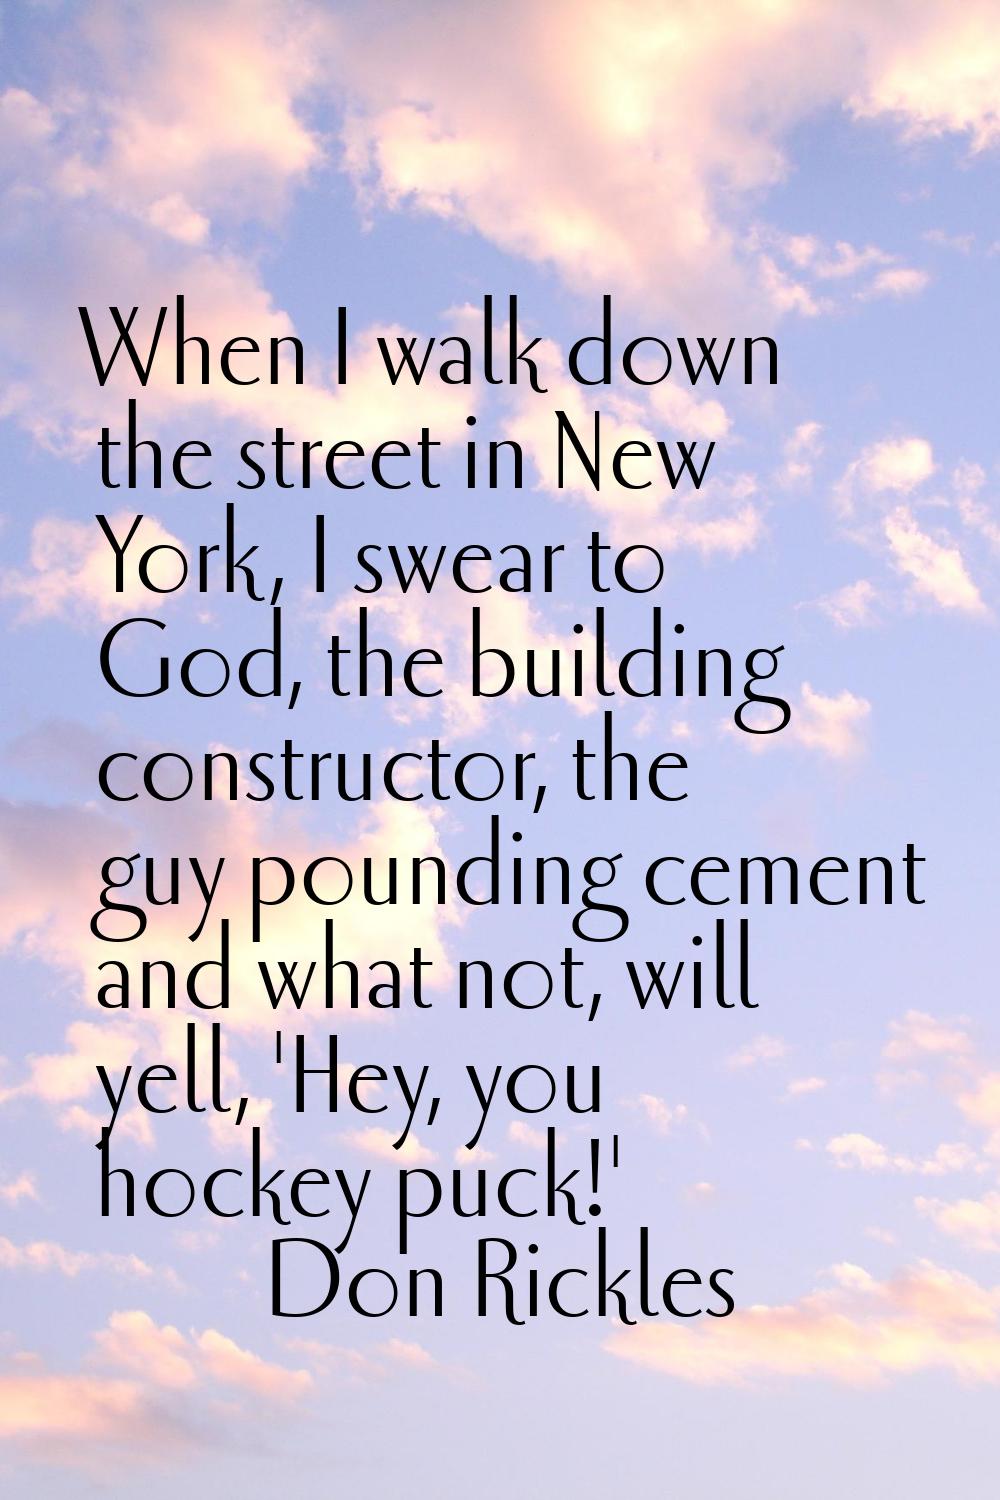 When I walk down the street in New York, I swear to God, the building constructor, the guy pounding